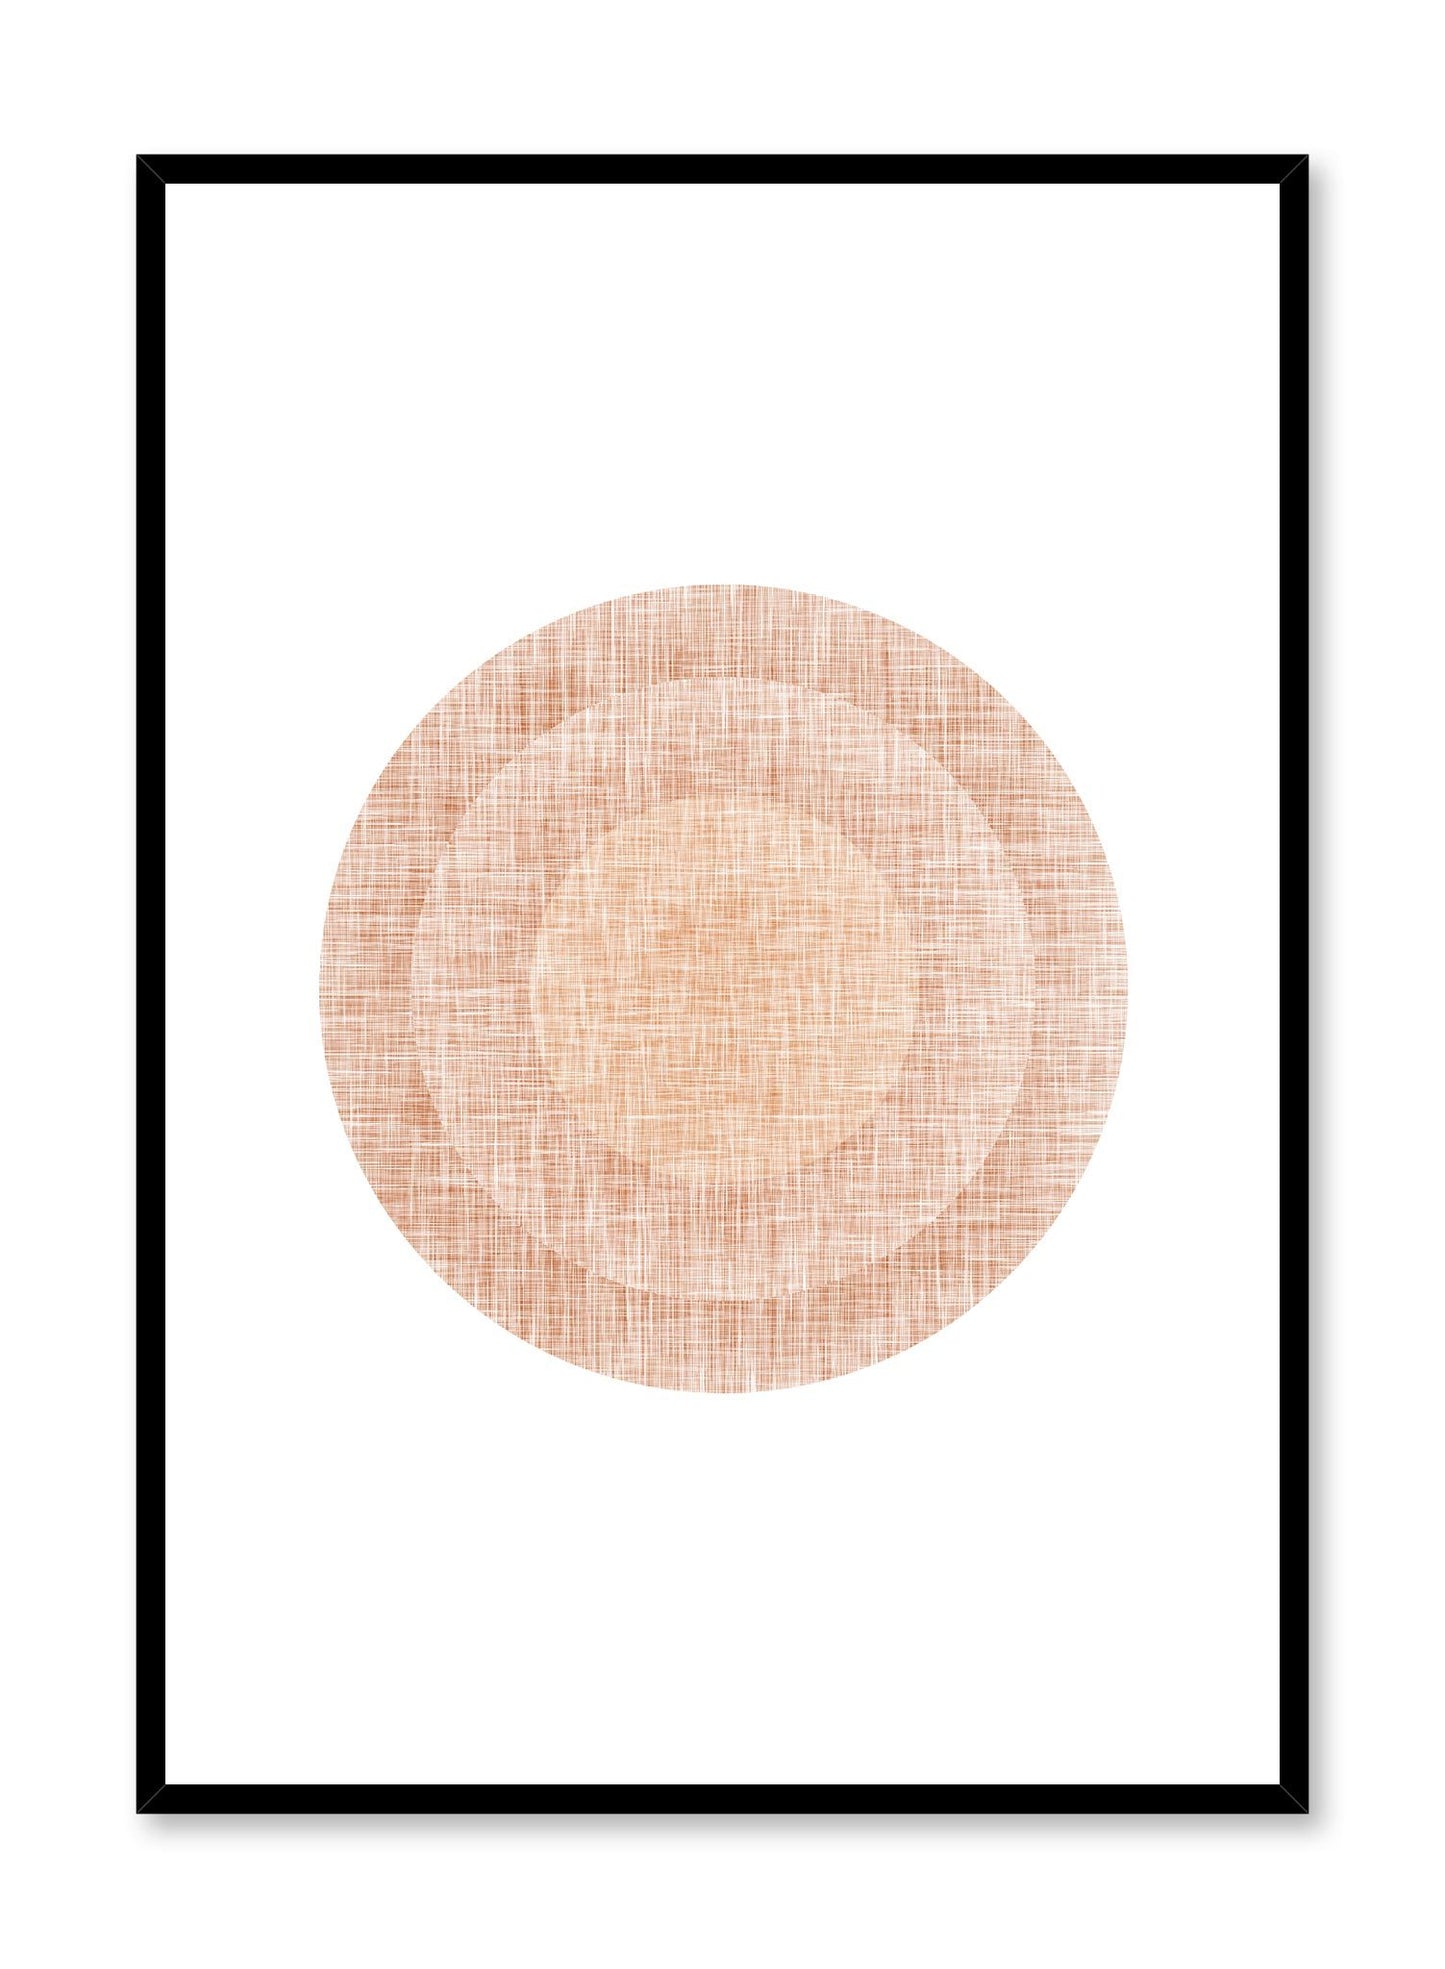 Minimalist design poster by Opposite Wall with abstract orange circles in target shape